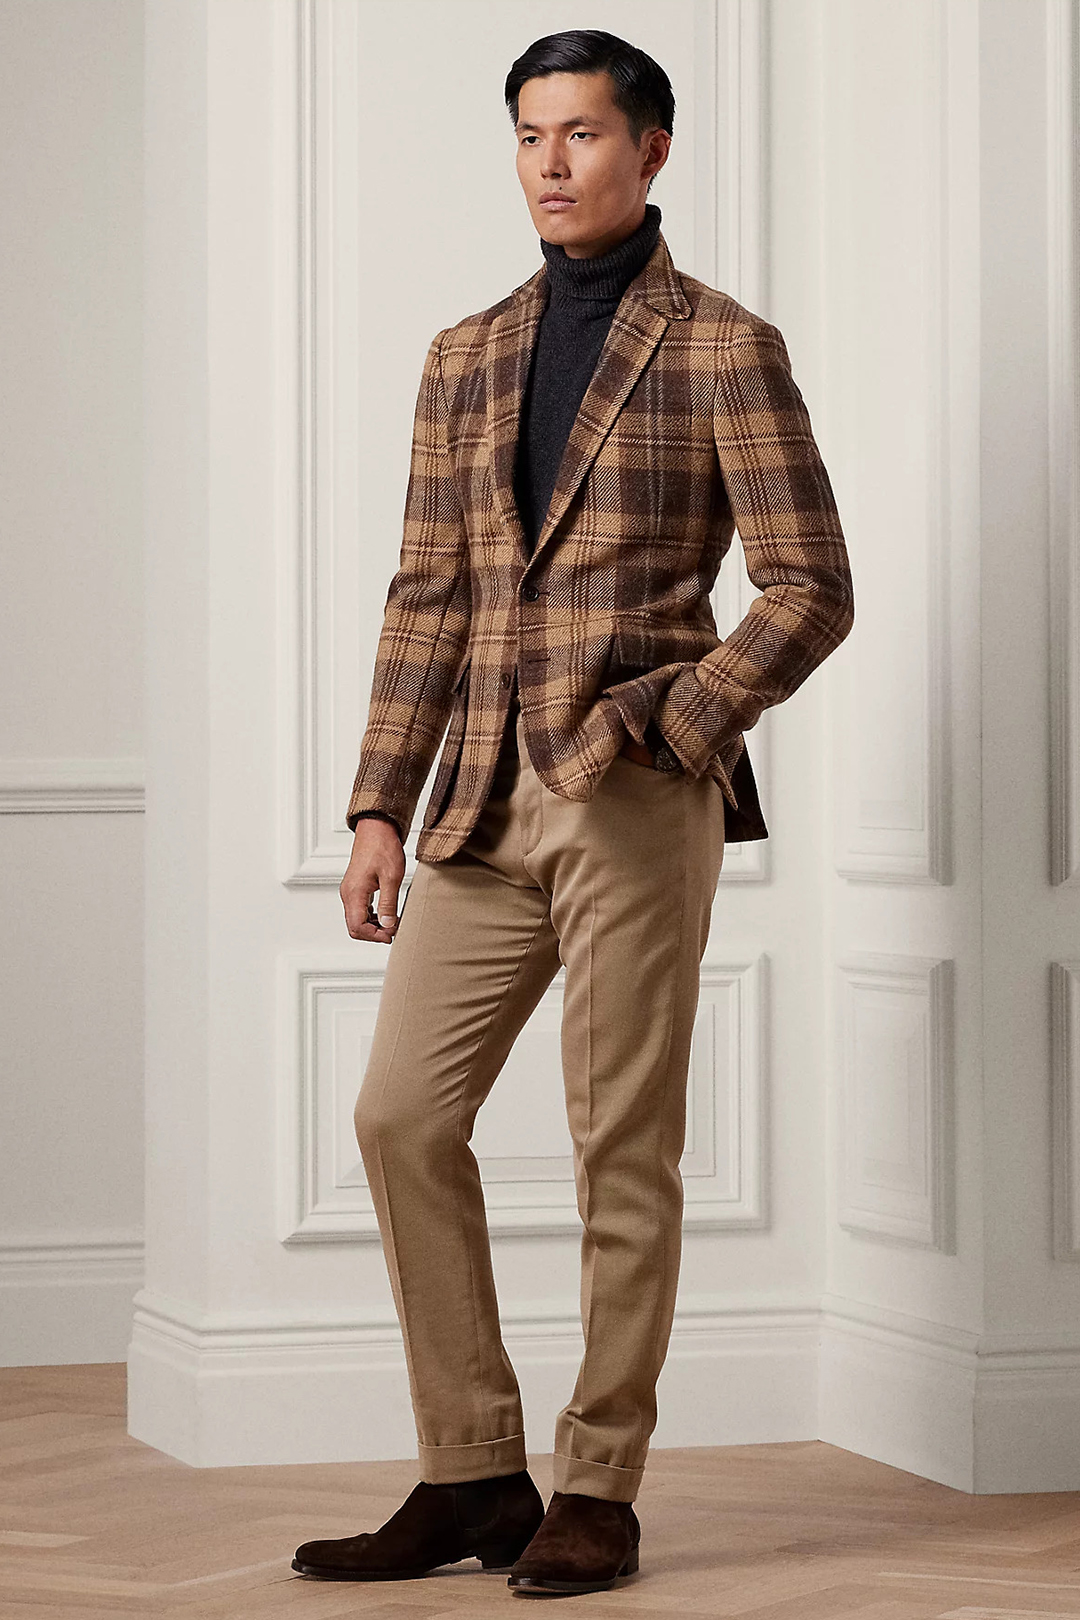 Brown plaid blazer, black turtleneck, tan chinos, and brown suede Chelsea boots outfit